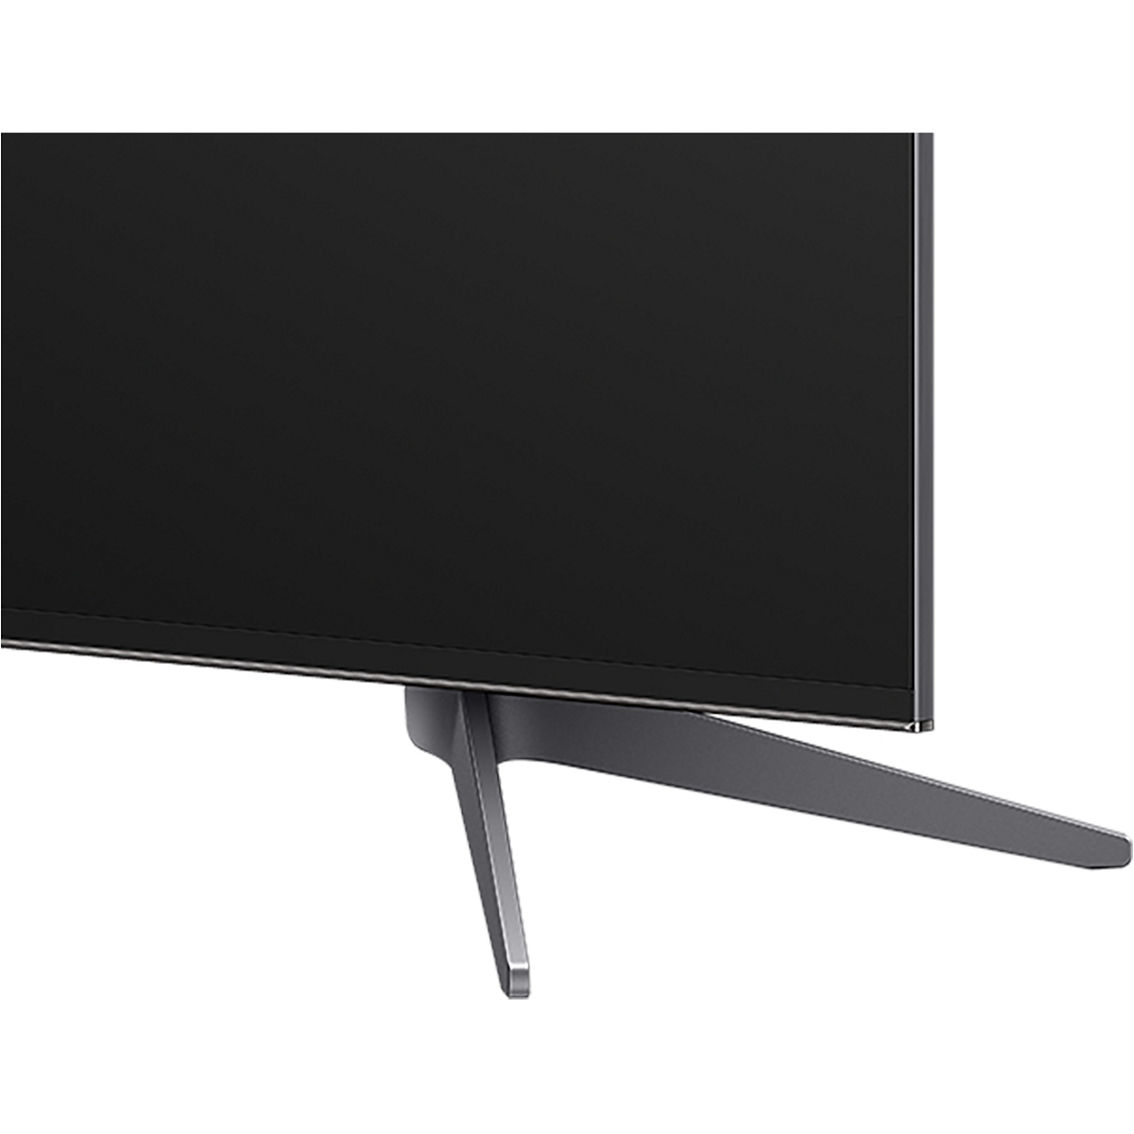 TCL 65 in. 4K QLED TV Auto-Game Mode, VRR Gaming & Game Accelerator 240 65Q750G - Image 8 of 9